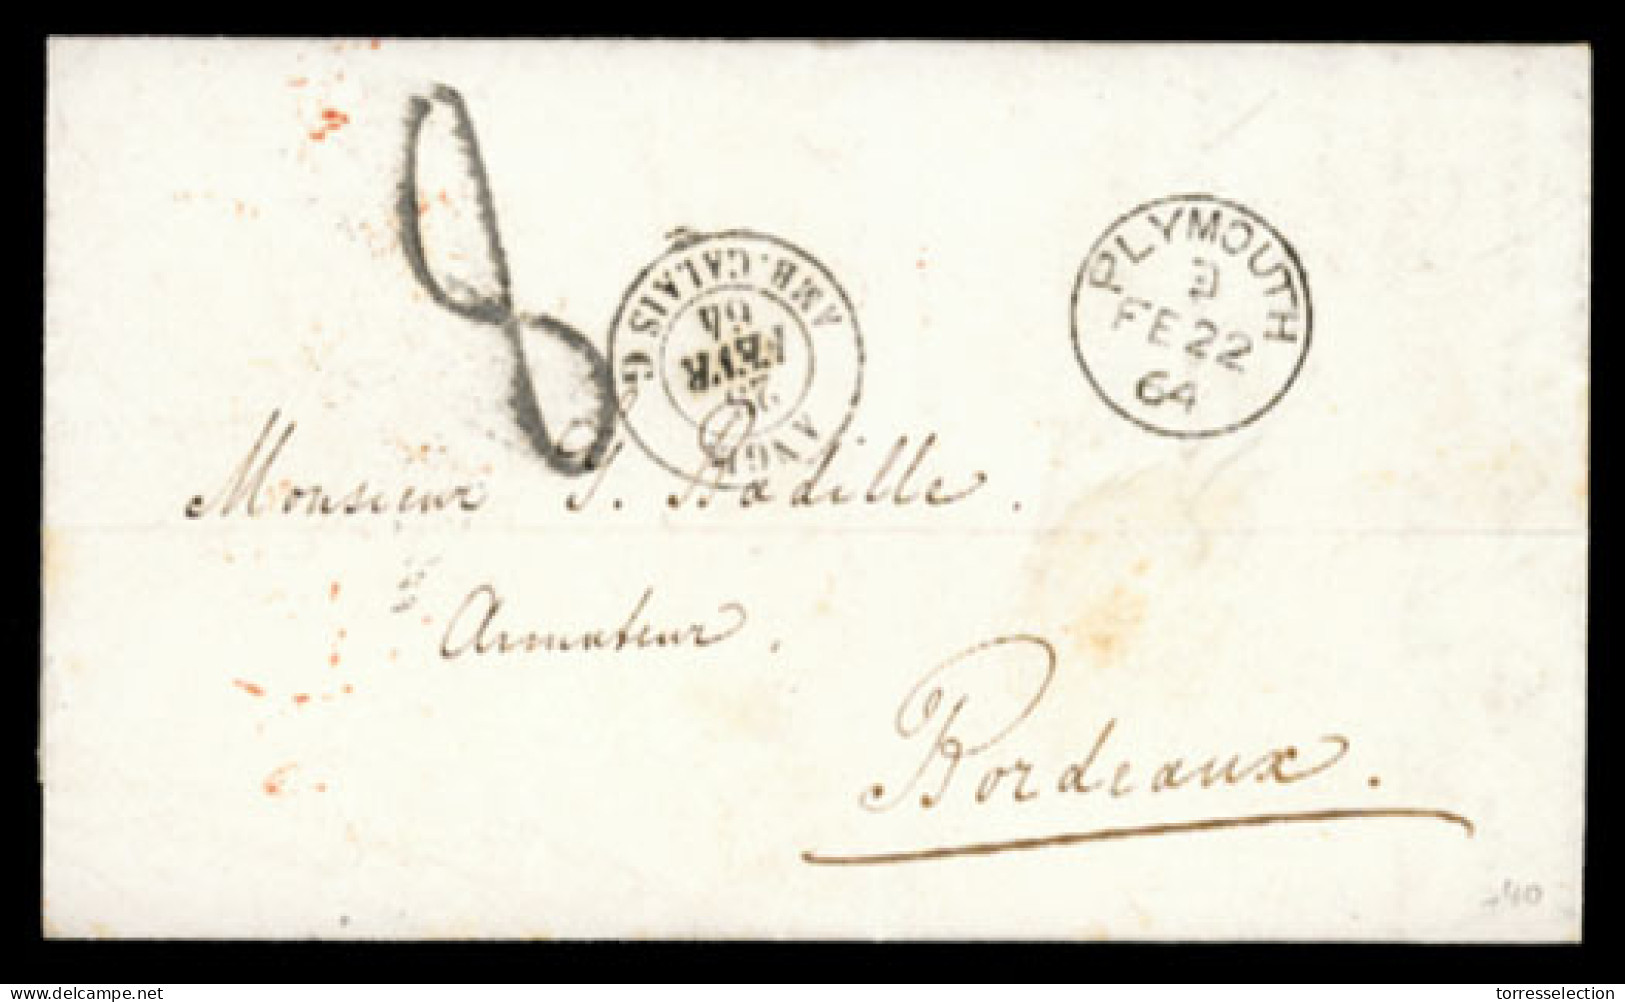 GREAT BRITAIN. 1864. Plymouth To France. EL.diff.nice Marks And Charge. - ...-1840 Vorläufer